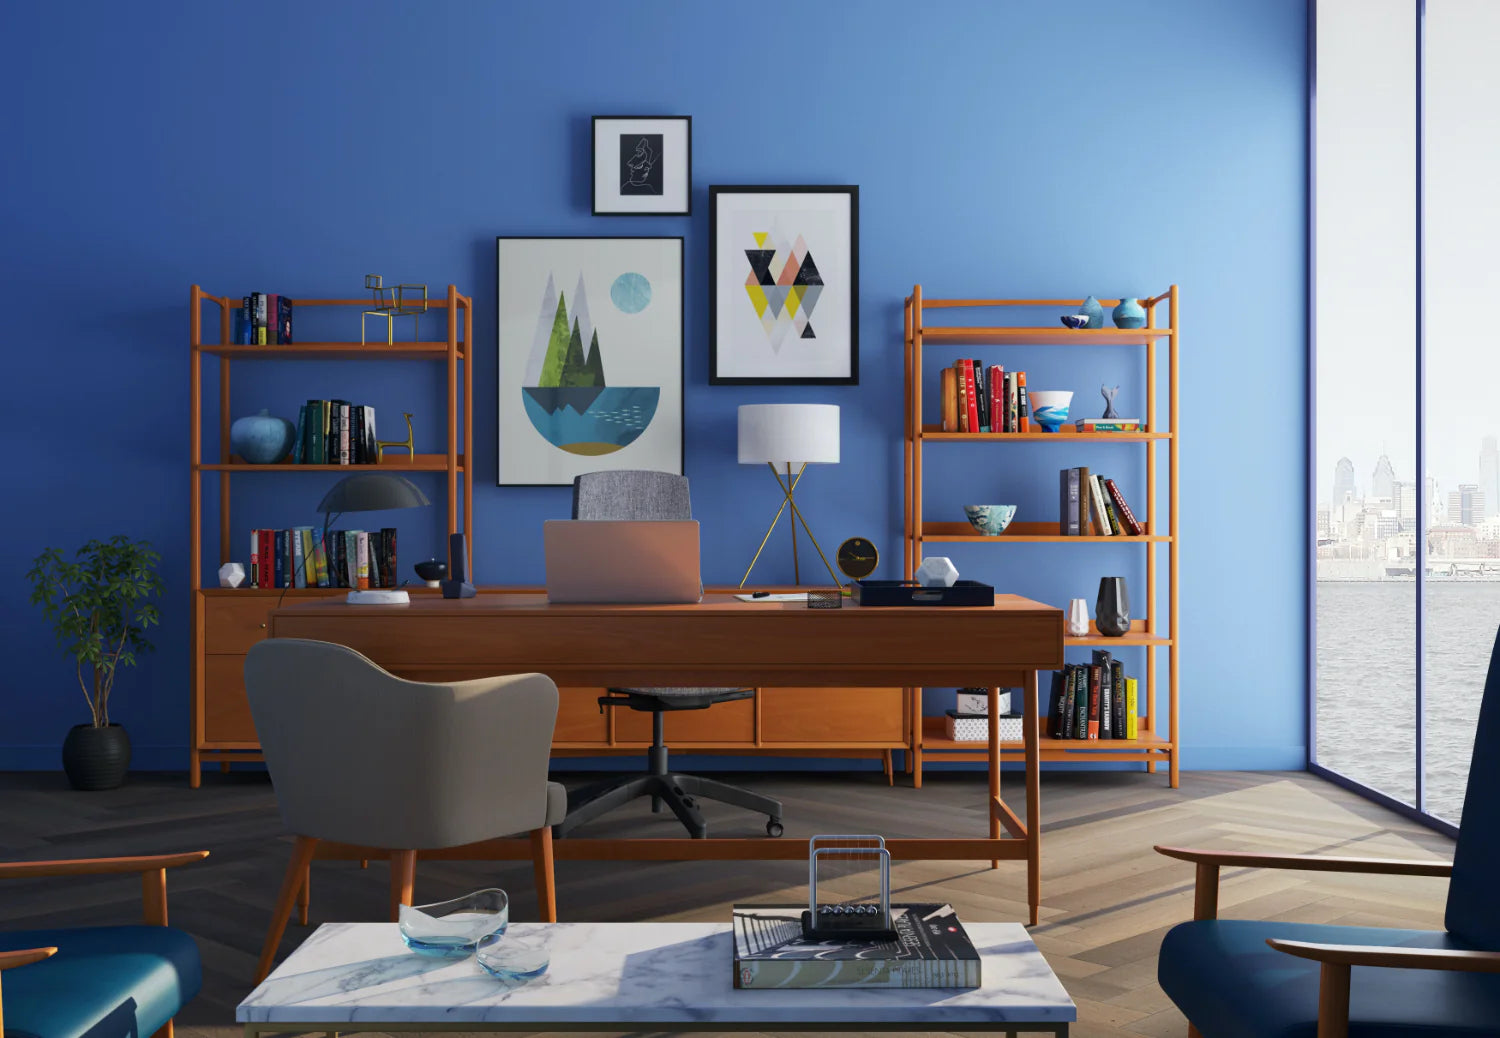 A home office with bright blue walls and modern MCM decor